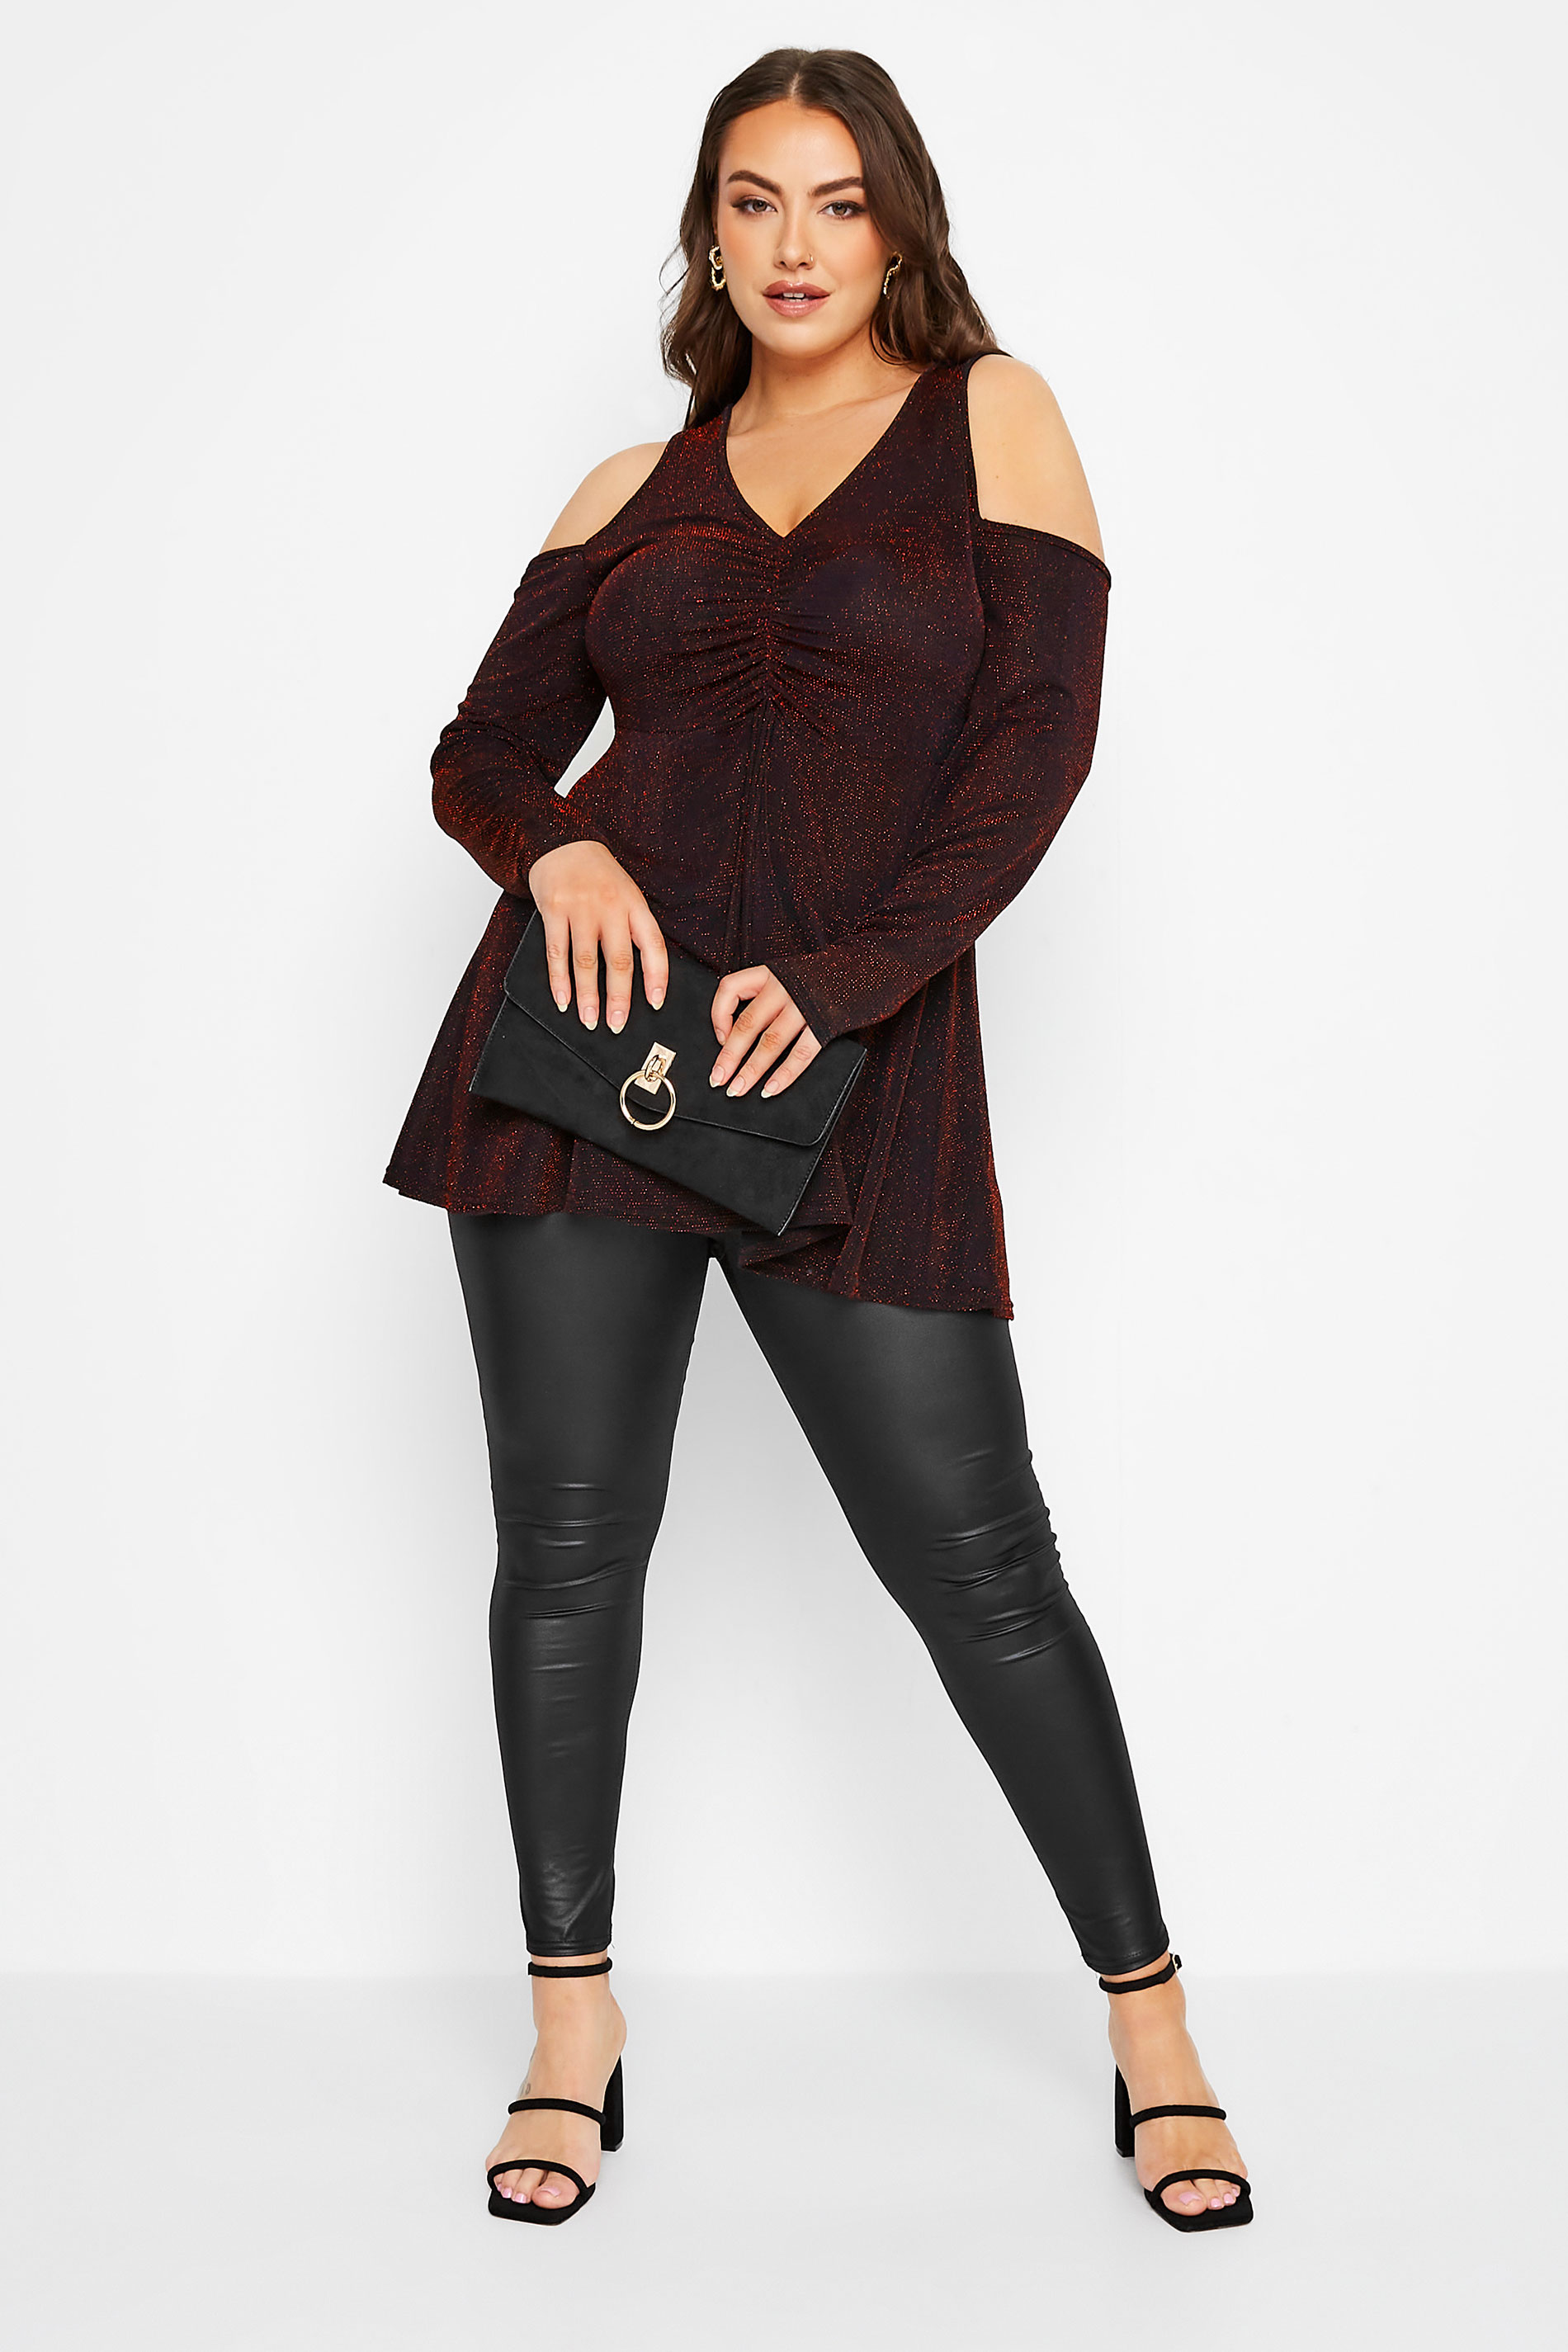 LIMITED COLLECTION Plus Size Black & Red Glitter Cold Shoulder Top | Yours Clothing 2